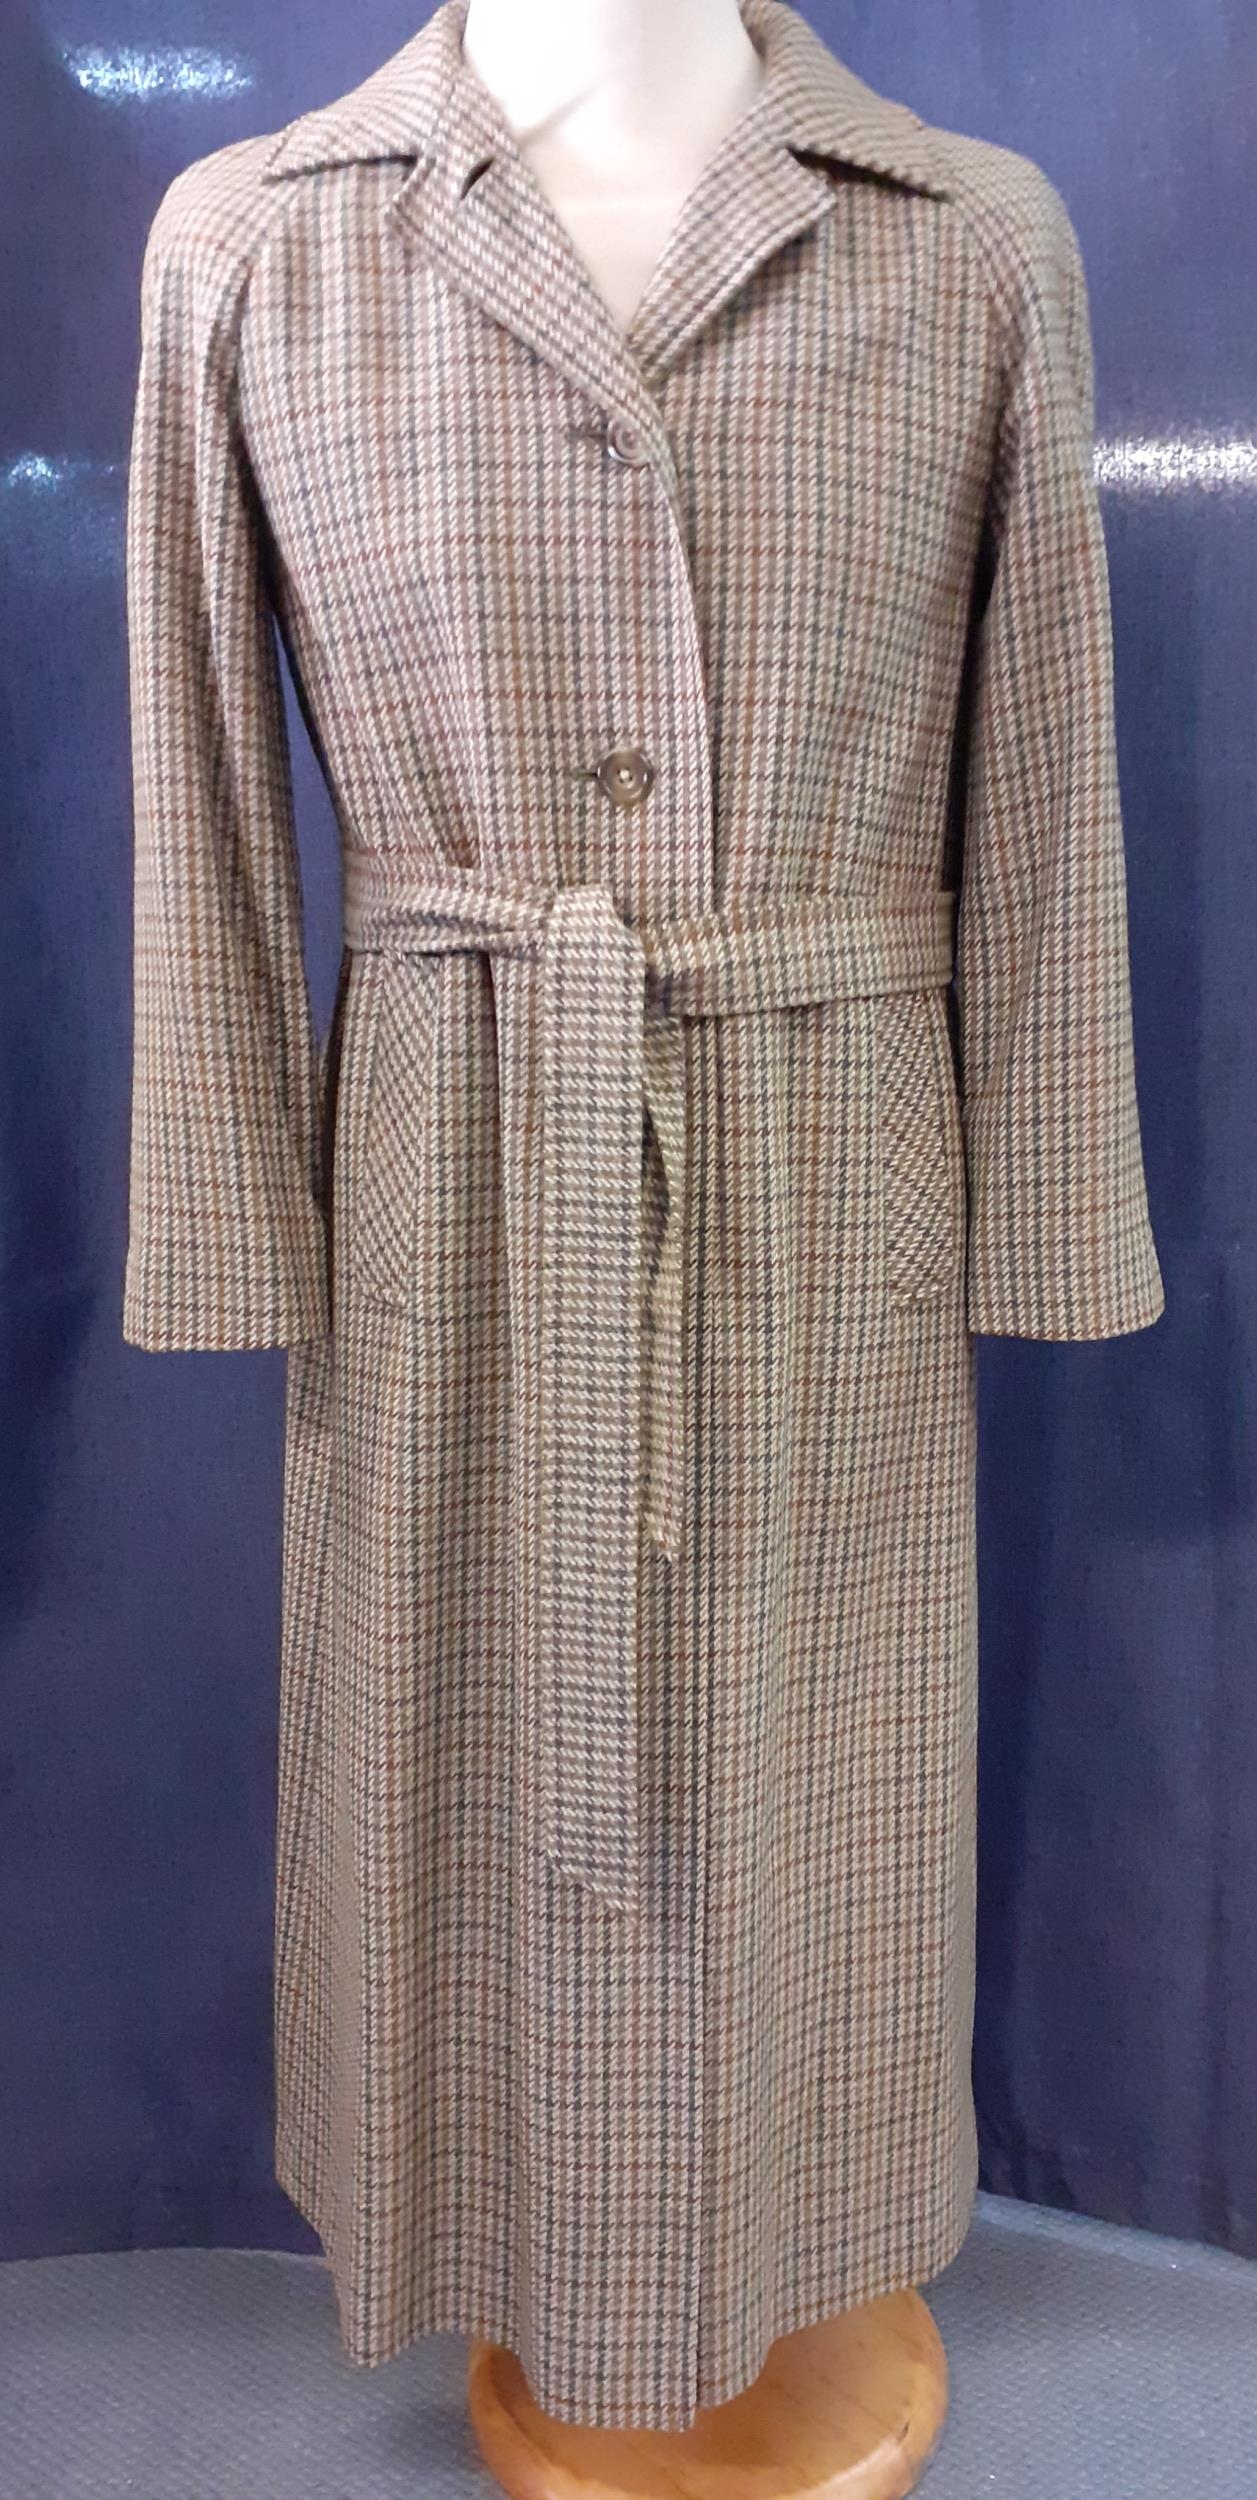 Aquascutum- A 1970's woollen coat in iconic tweed, 38" chest x 47" long, with 2 front pockets and